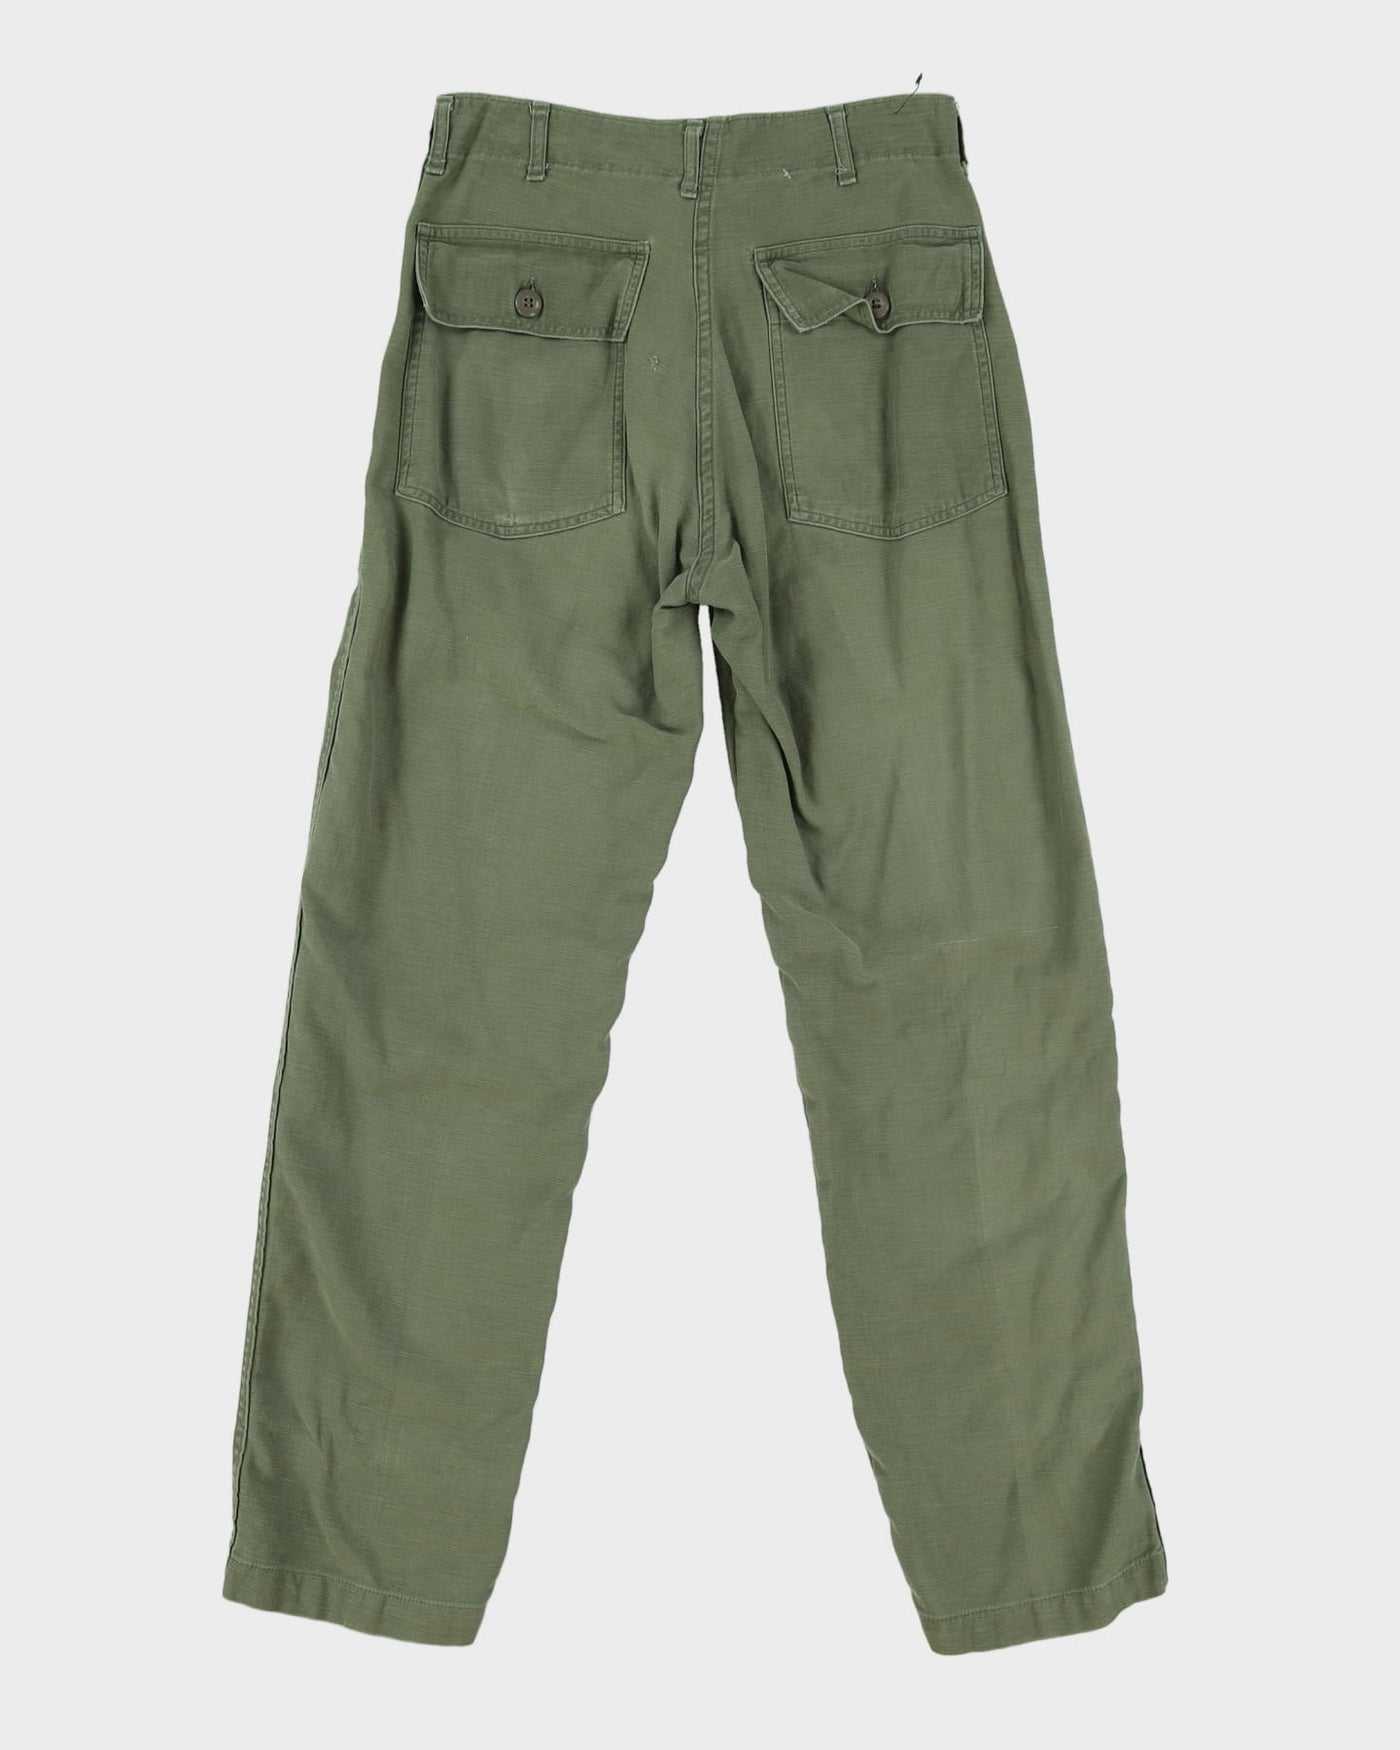 1960s Vintage US Army OG-107 Sateen Utility Trousers - 28x28